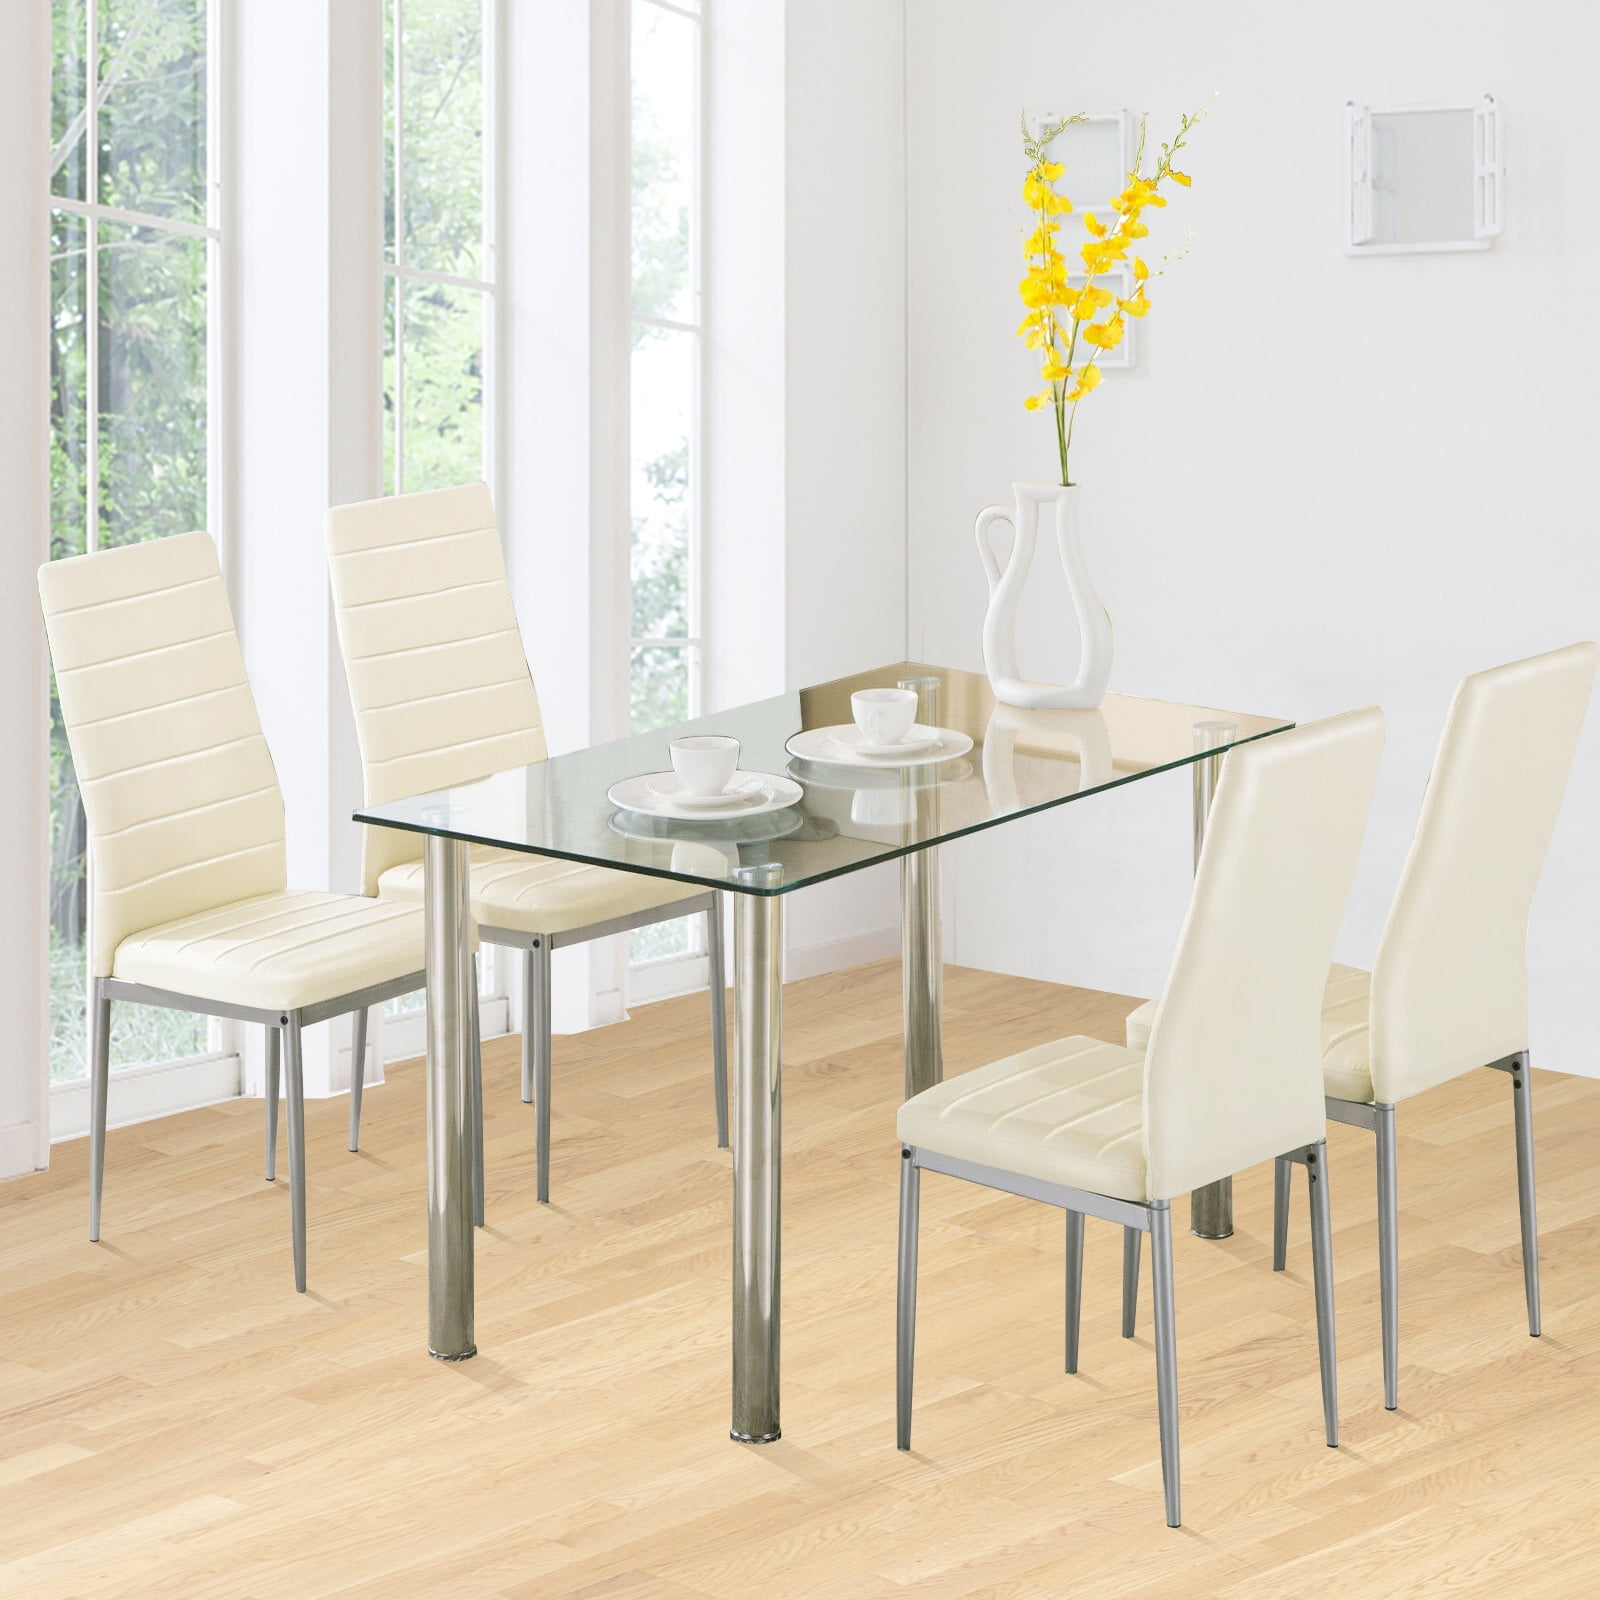 Mecor 5 Piece Dining Table Set Tempered, Light Wood Dining Room Table Sets